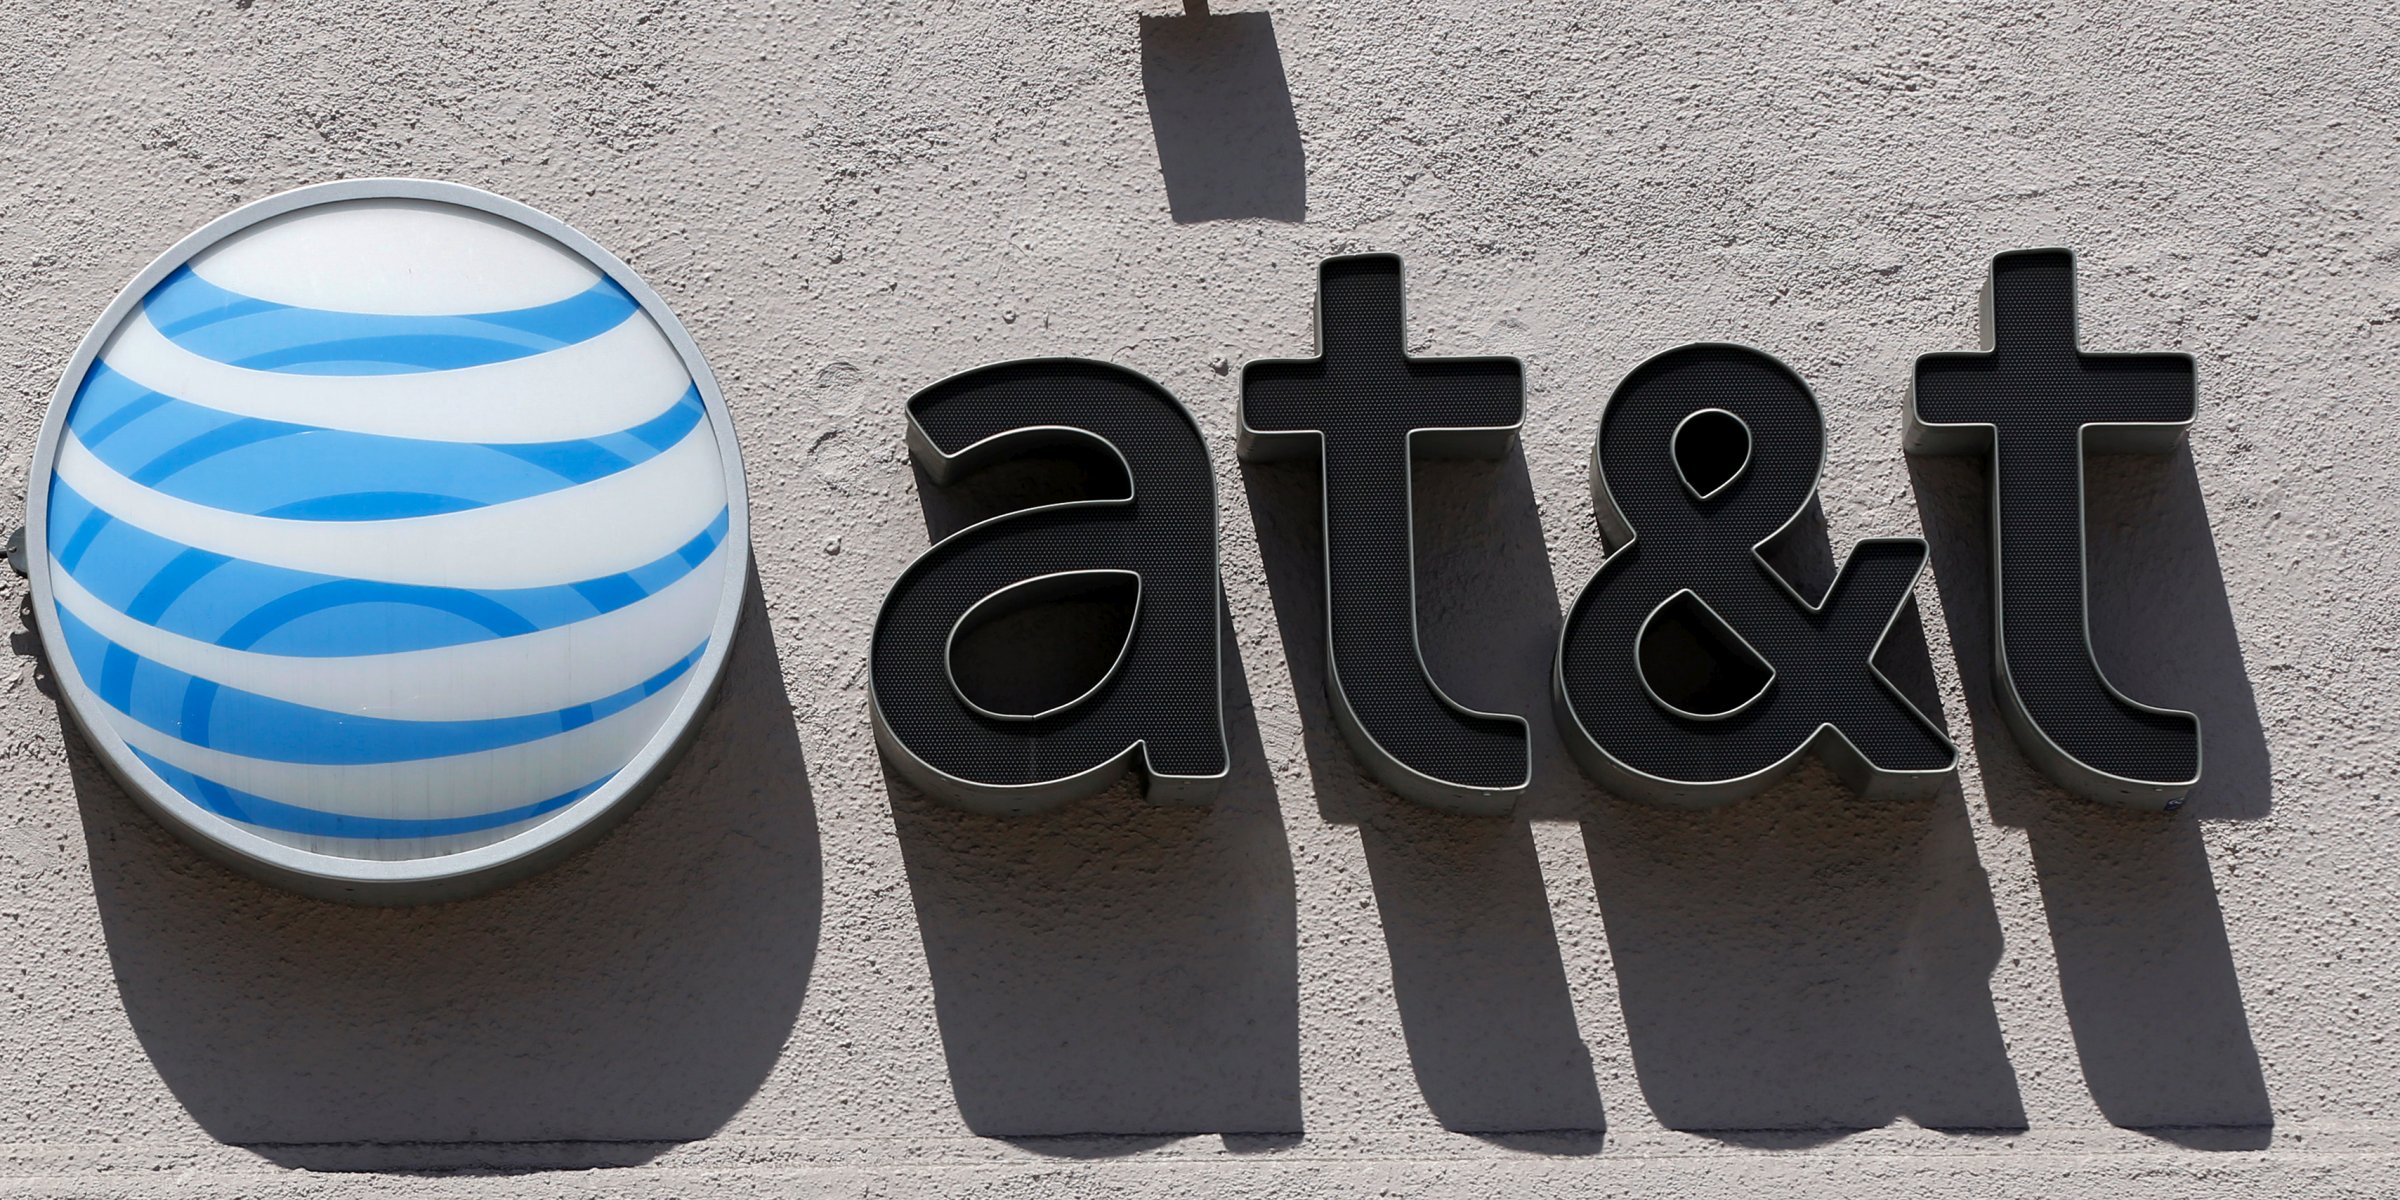 AT&T refines unlimited data plans after just 10 days